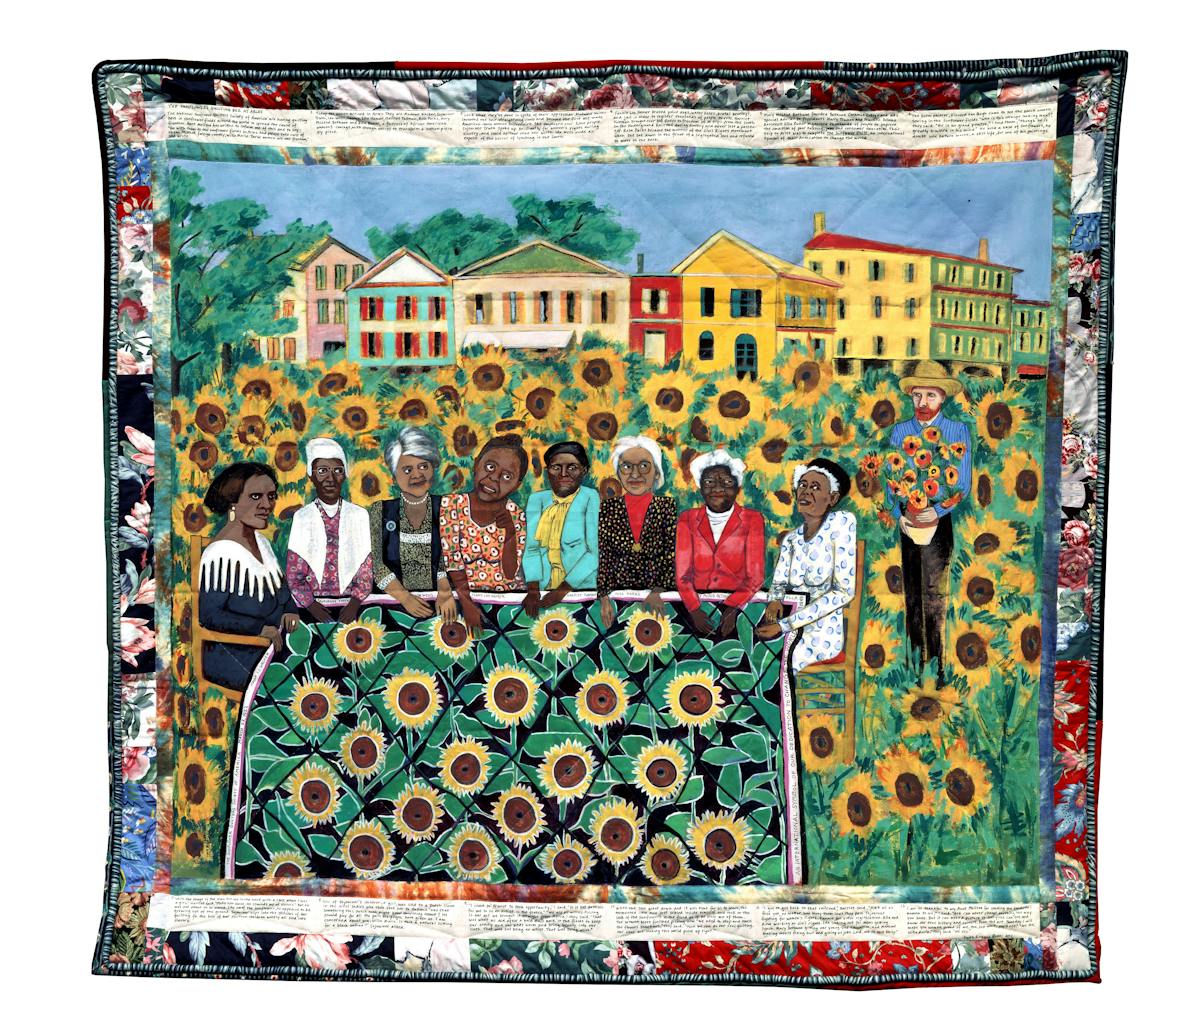 quilt showing group of women seated around a quilt with sunflower pattern in the midst of a sunflower field with the painter van gogh standing nearby and a grouping of buildings in the backdrop